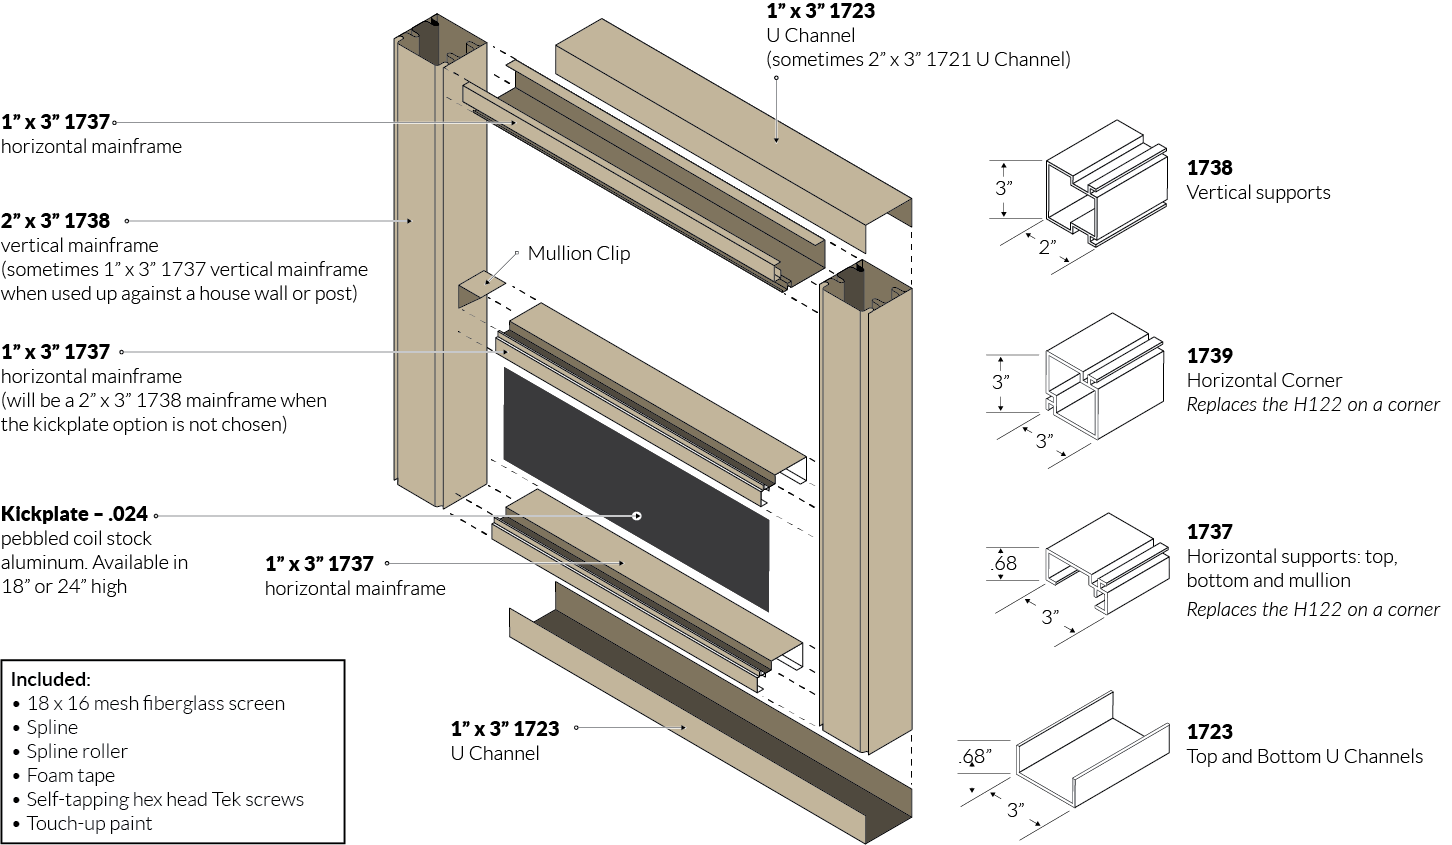 Exploded view of the screen walls installation